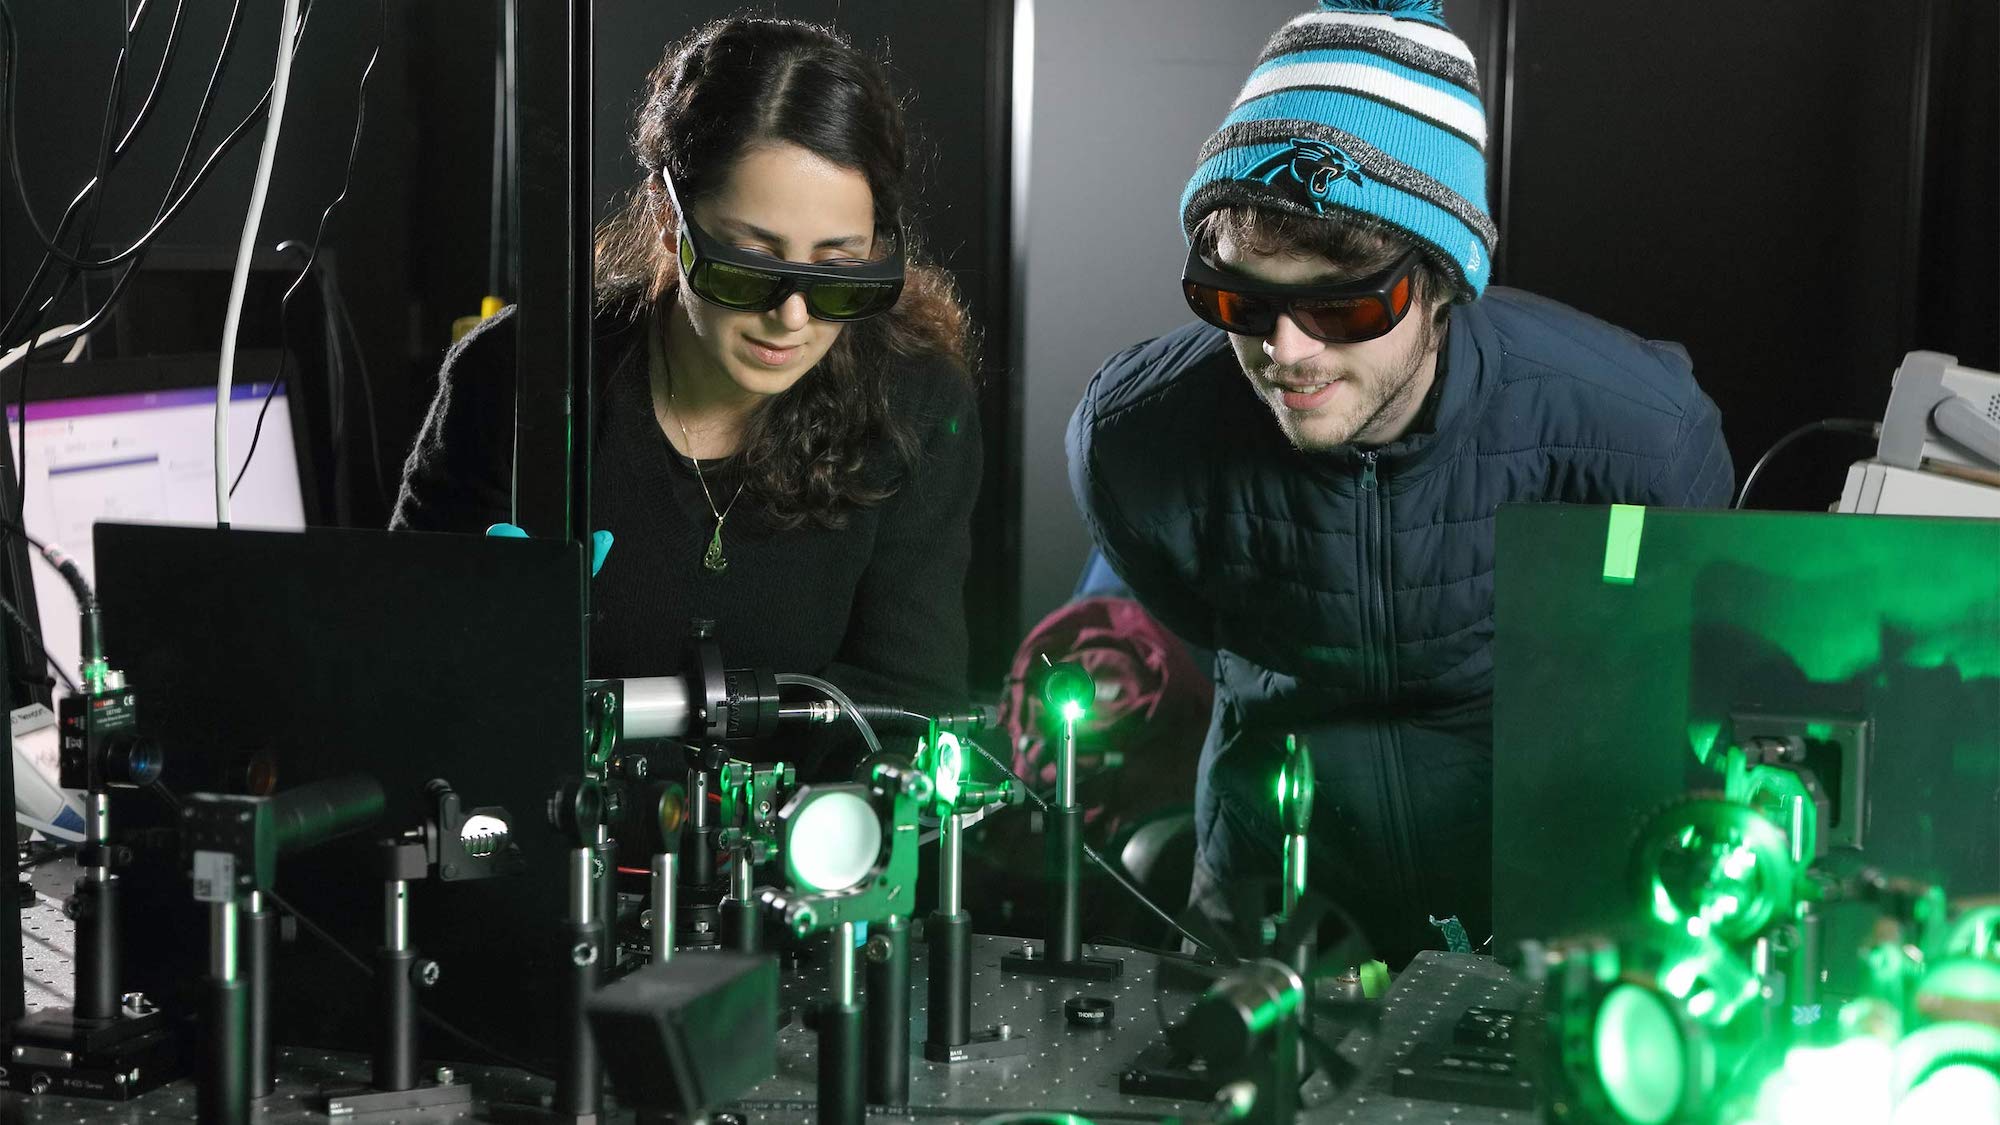 Two researchers look at green plasma ray in lab setting